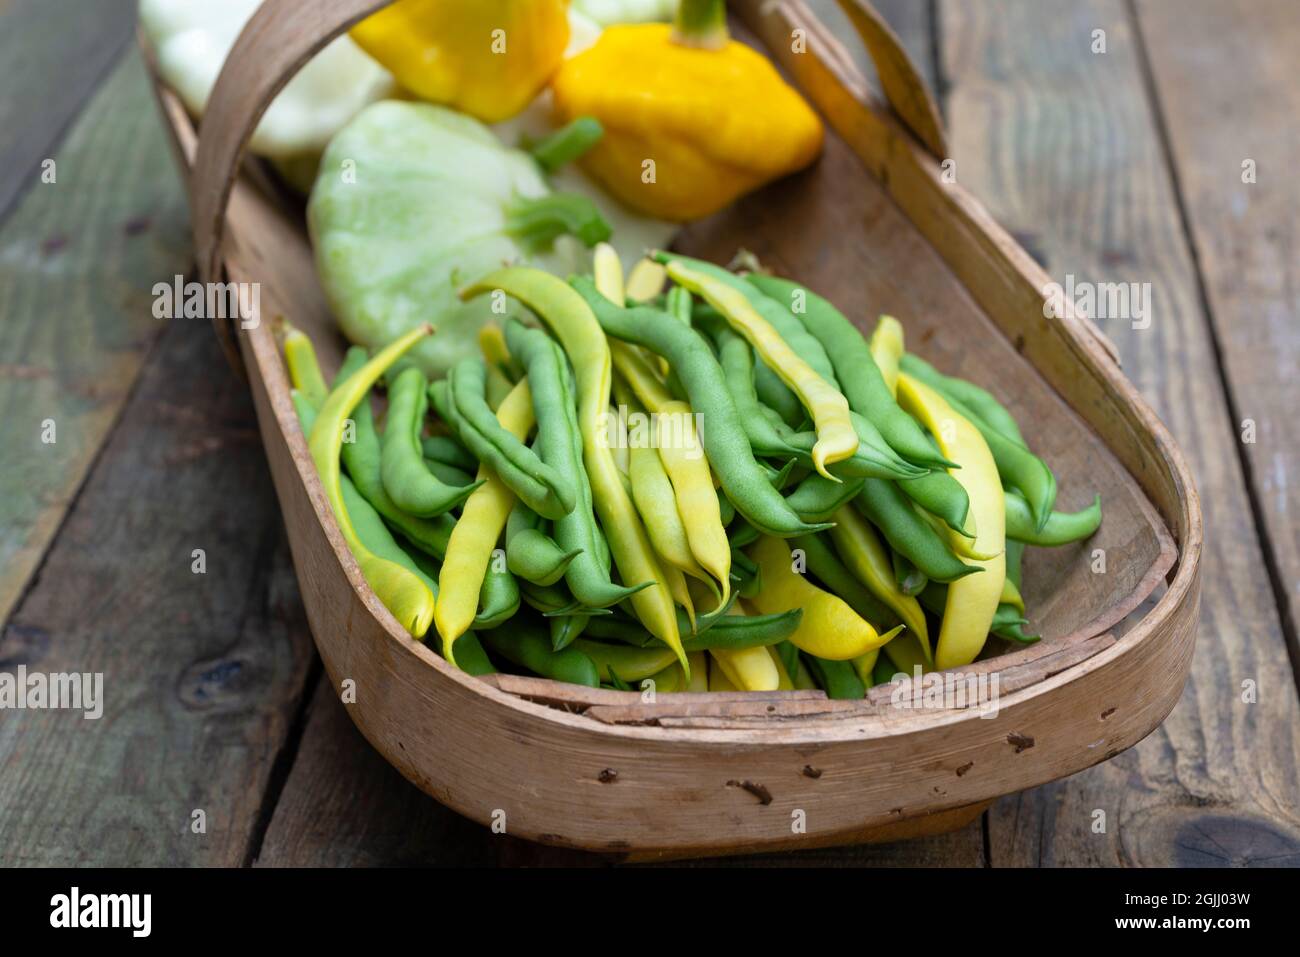 A Sussex trug full of climbing yellow and green French beans and yellow and white patty pan squash. Stock Photo